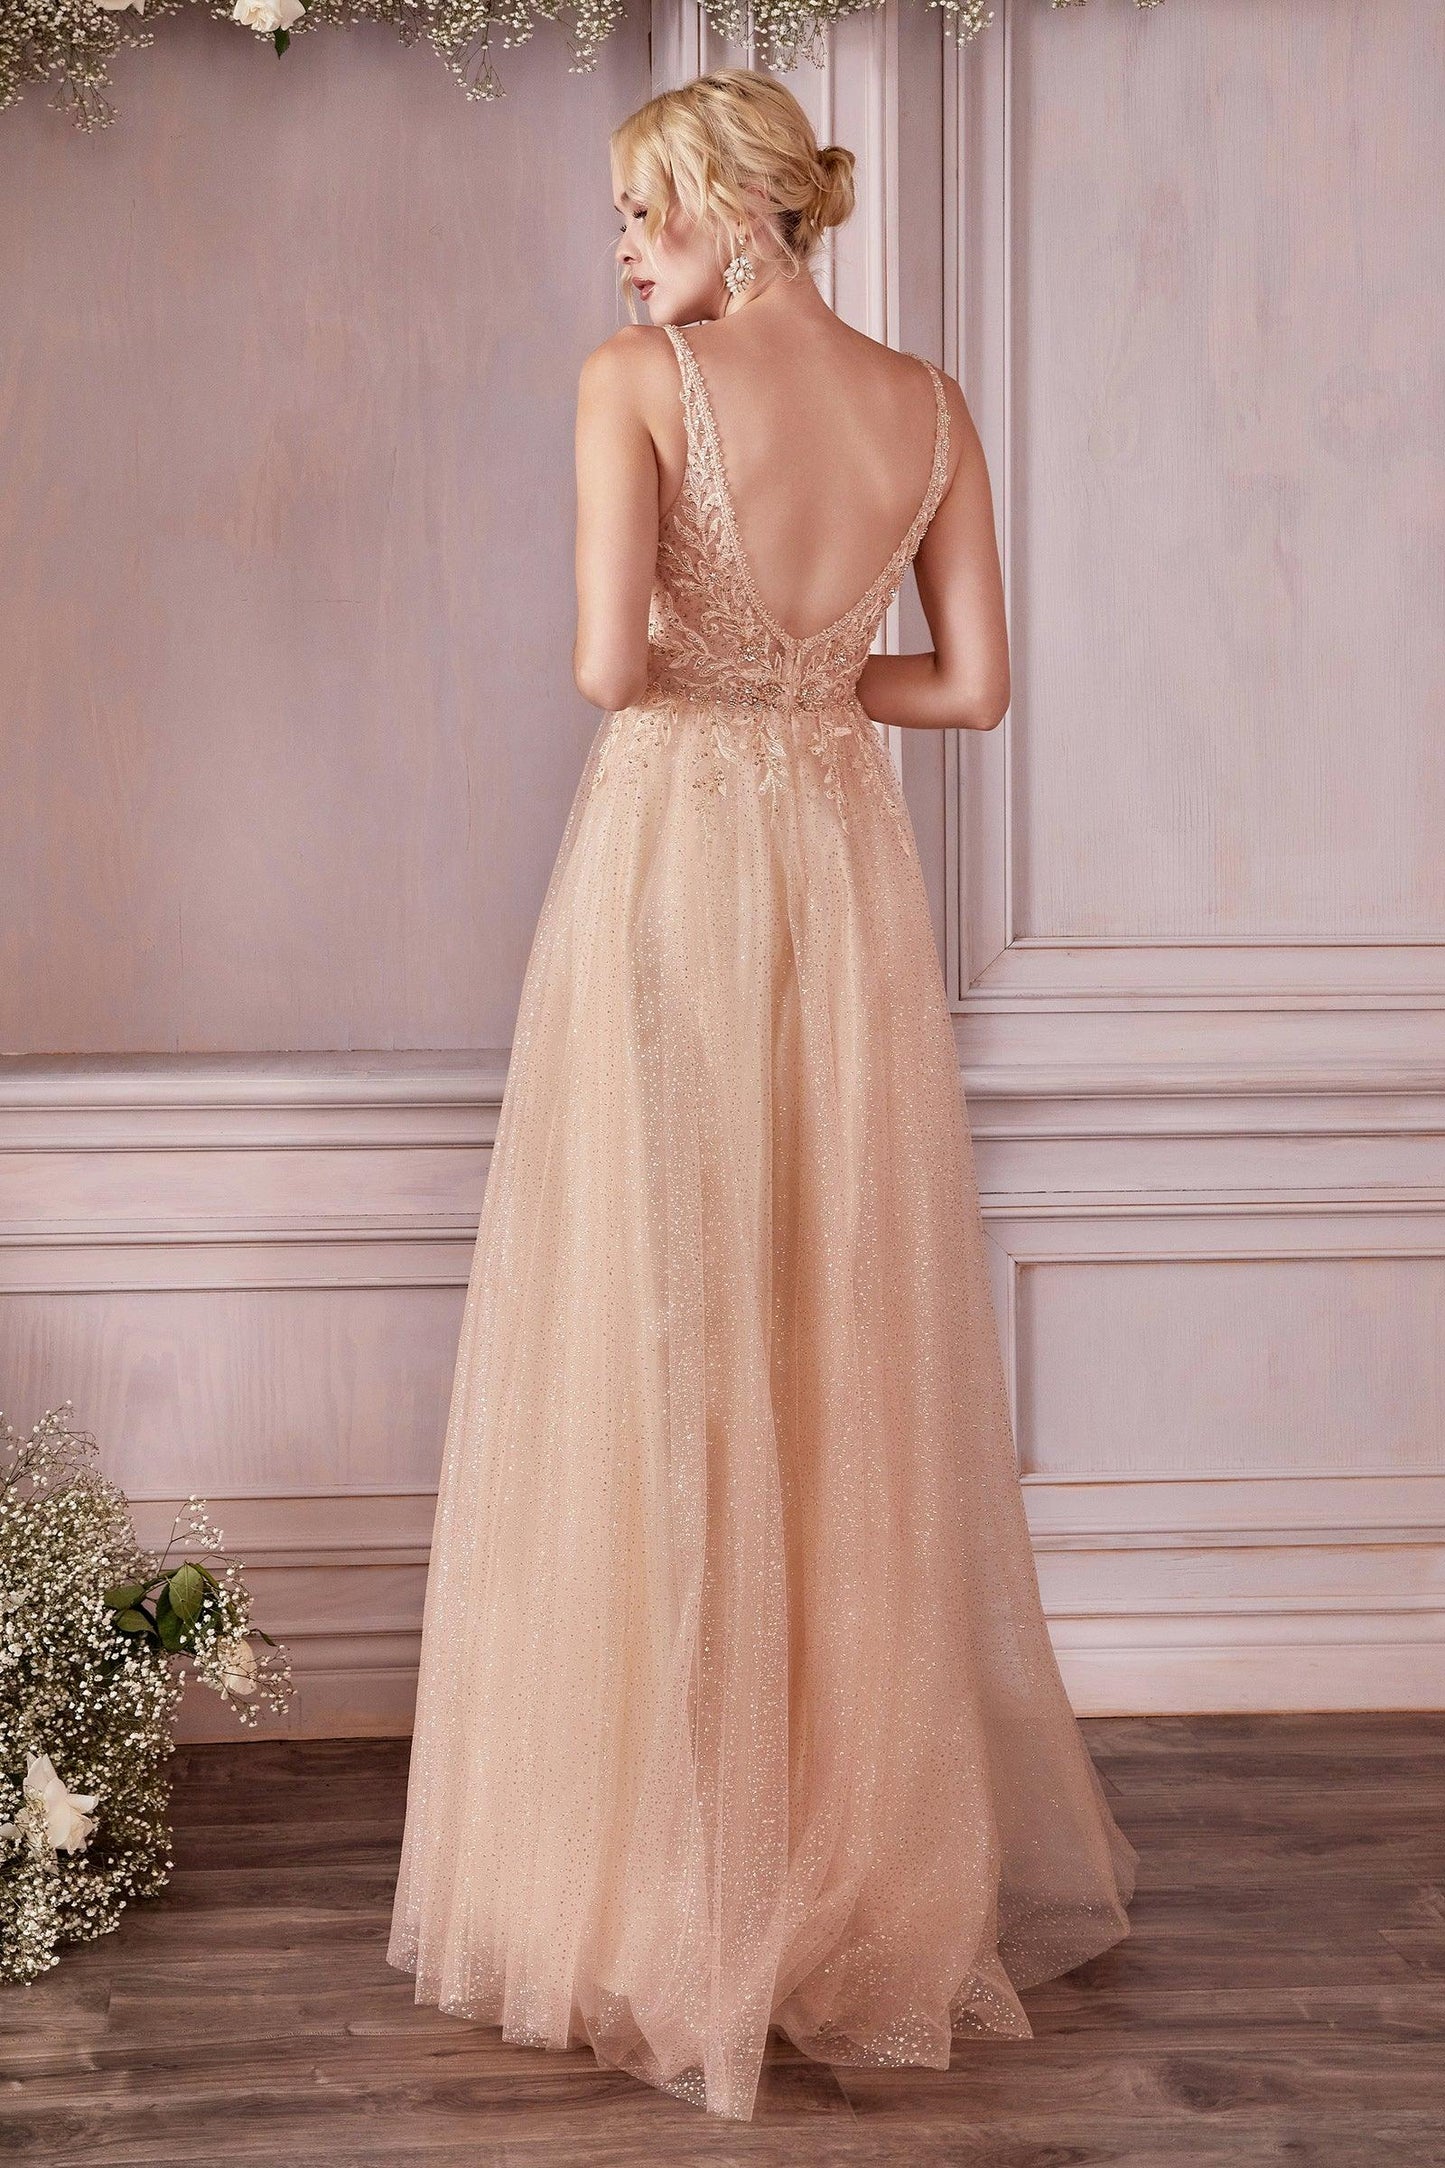 Strapless Tulle Long Formal Prom Dress - The Dress Outlet